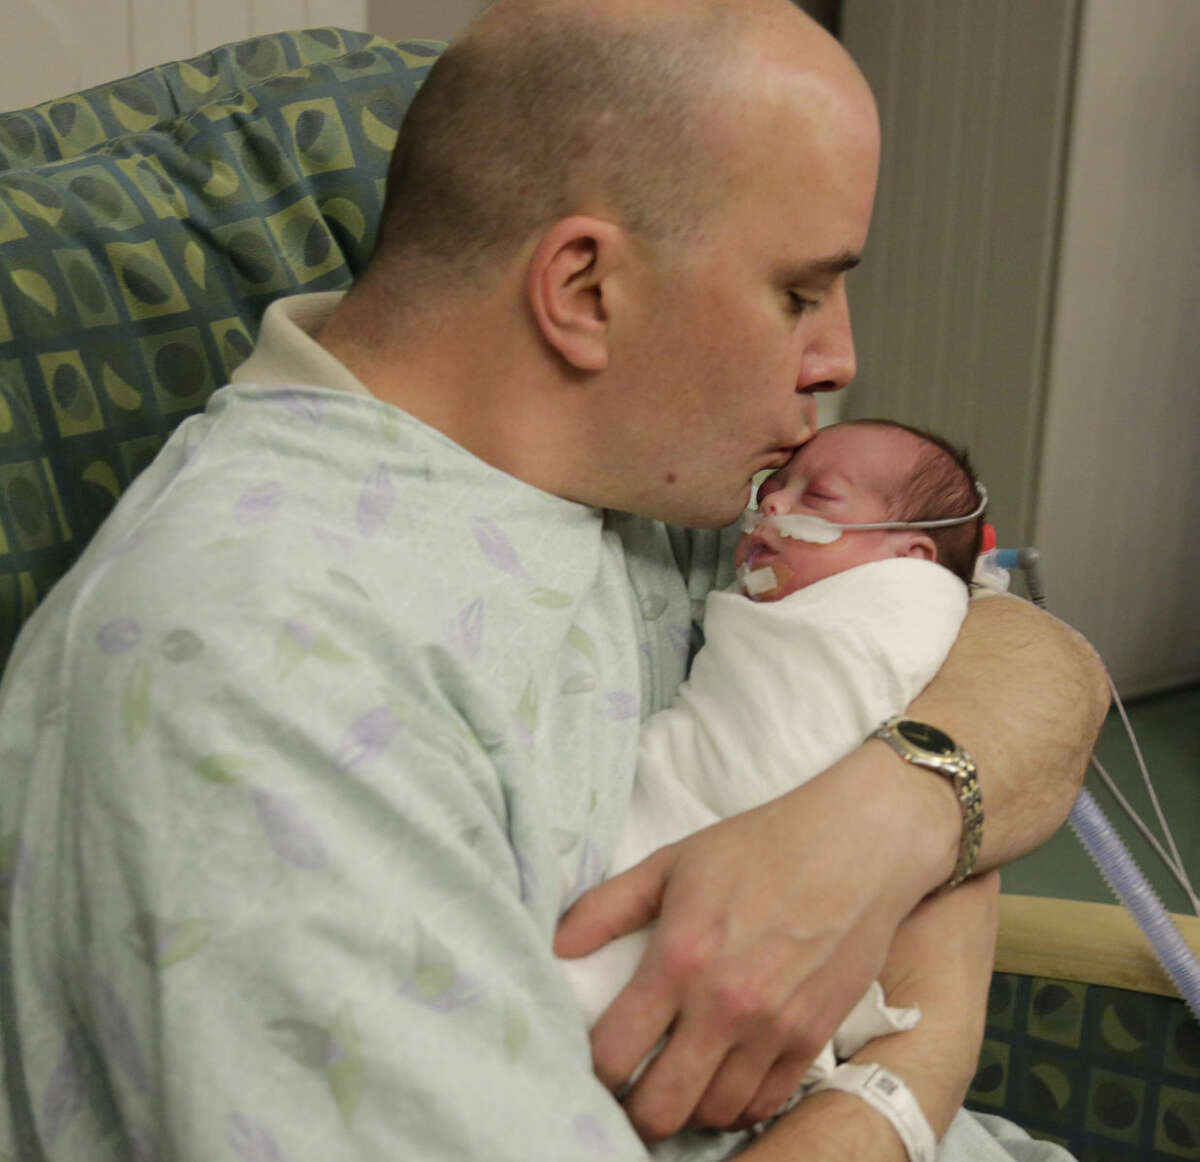 In this Tuesday, March 15, 2016 photo, parent Bryan Niedermeyer holds Evelyn, one of his twin preemie daughters after they underwent eye exams at Advocate Children's Hospital in Chicago. Olivia and Evelyn Niedermeyer are part of recent research showing benefits from low-tech pain management alternatives during necessary procedures on these fragile babies that are poked and prodded as part of medical care meant to help them survive, but can be painful. (AP Photo/M. Spencer Green)